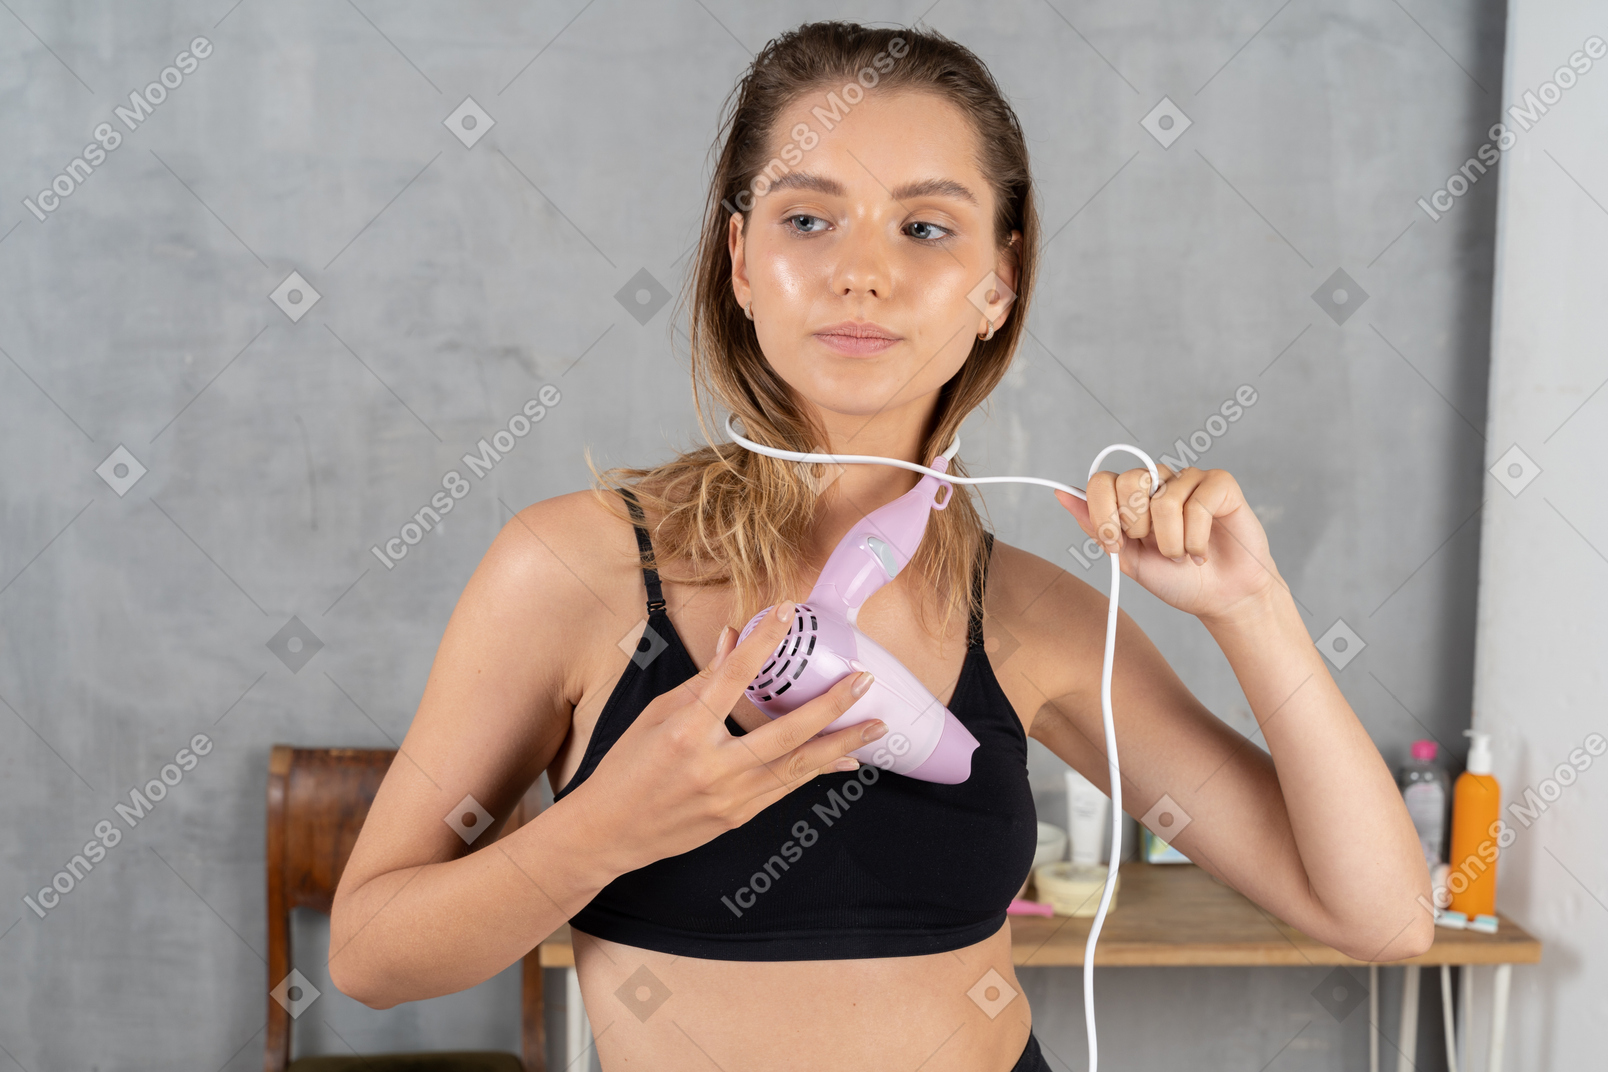 Front view of a young woman wrapping a hairdryer cord around her neck